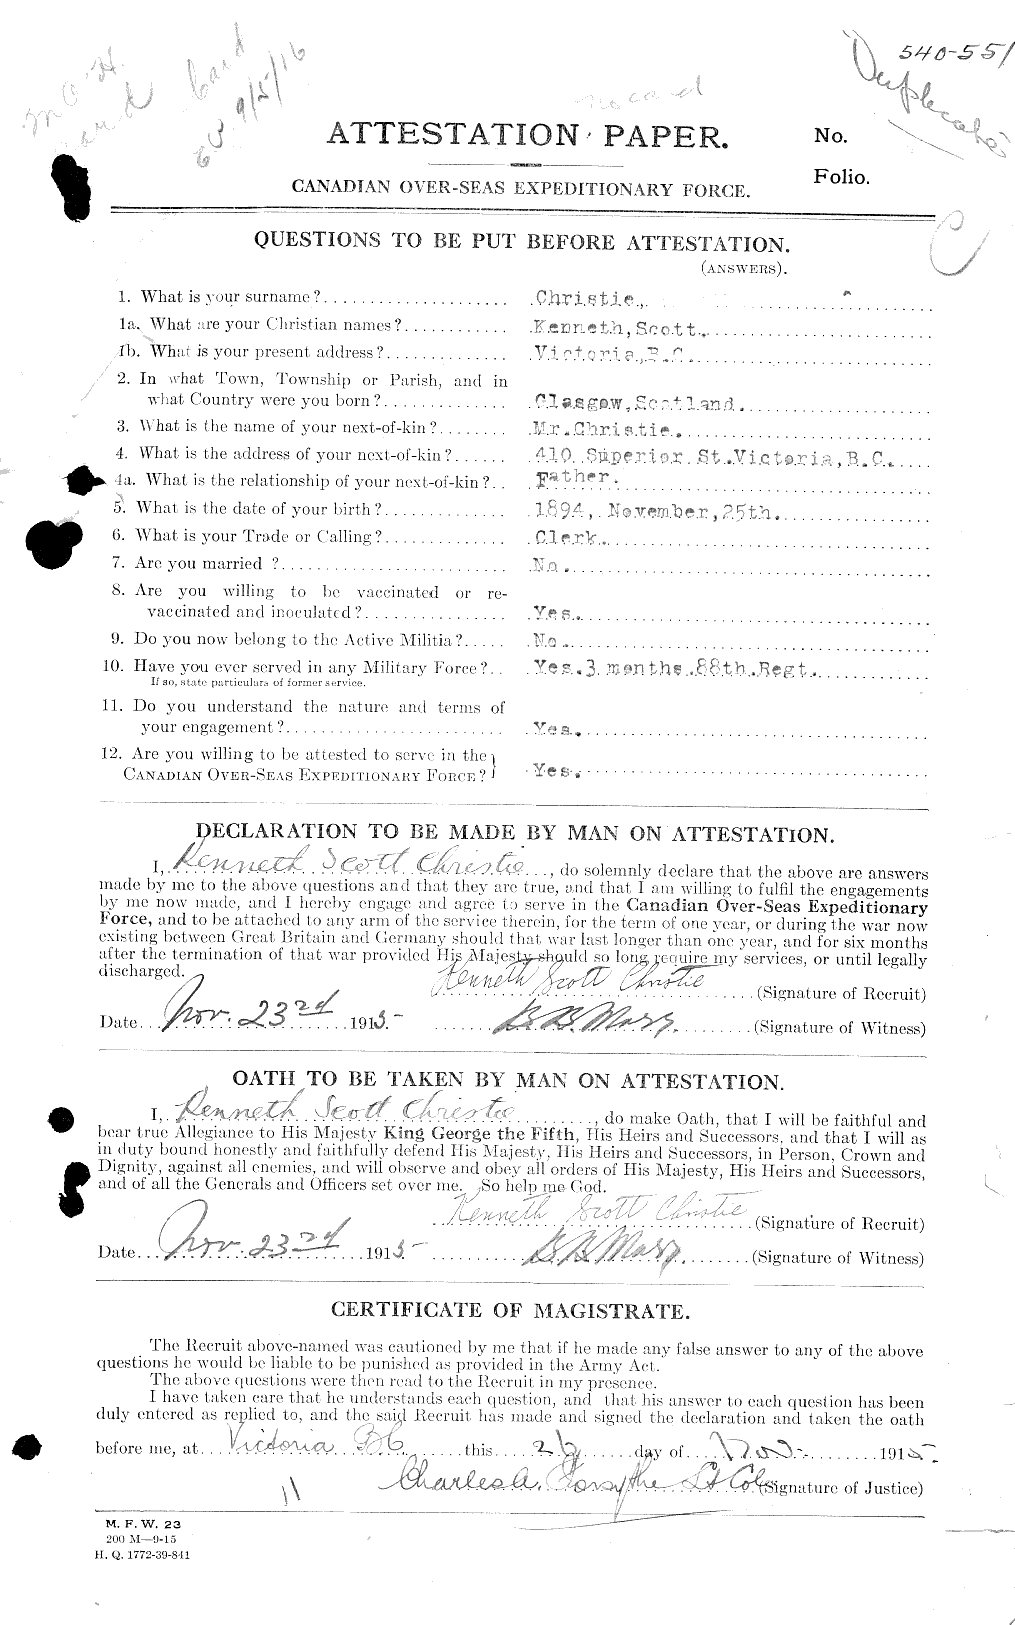 Personnel Records of the First World War - CEF 022022a